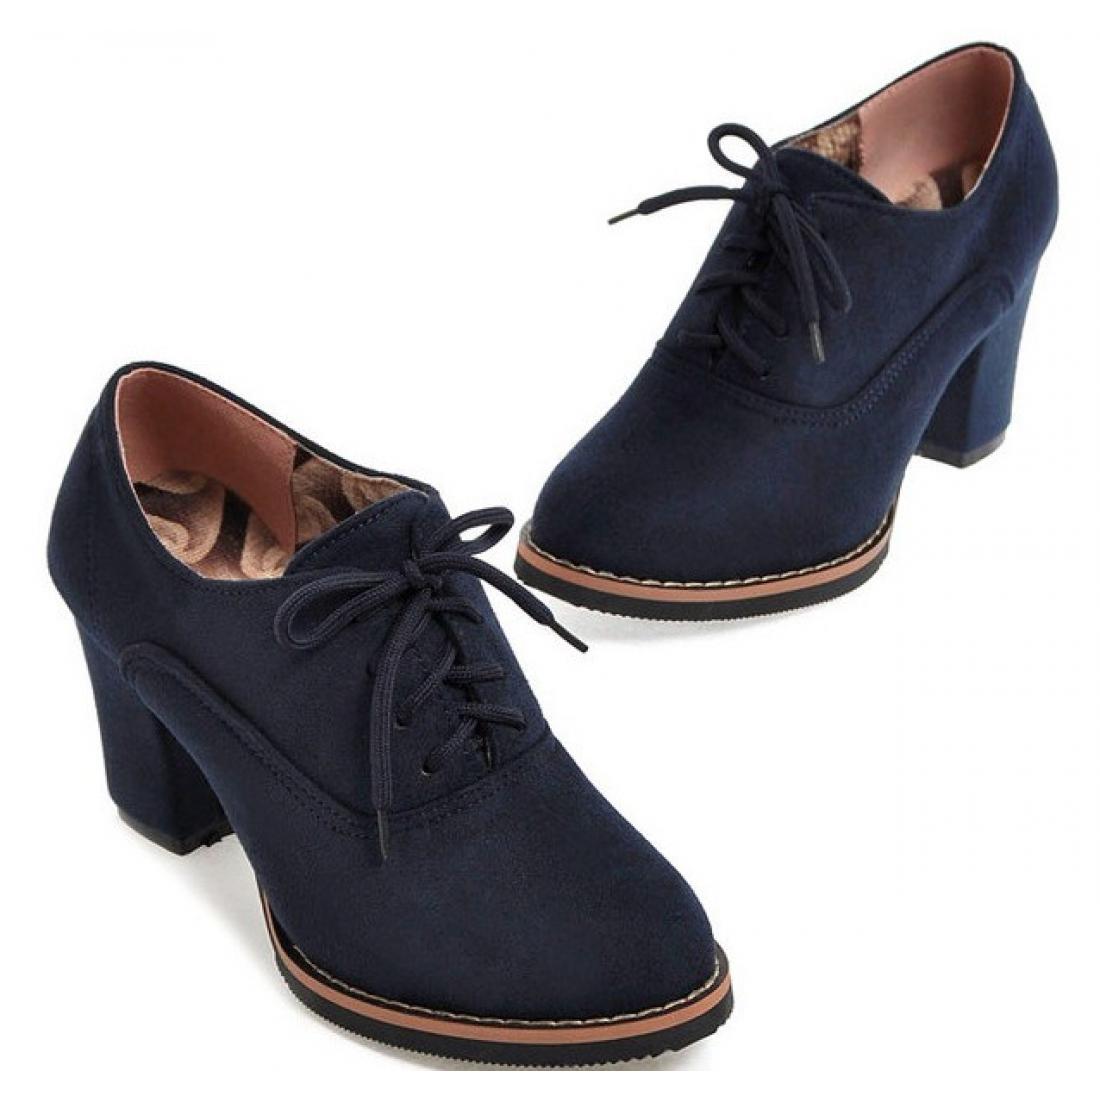 Blue Navy Suede School Lace Up High Heels Oxfords Shoes High ...